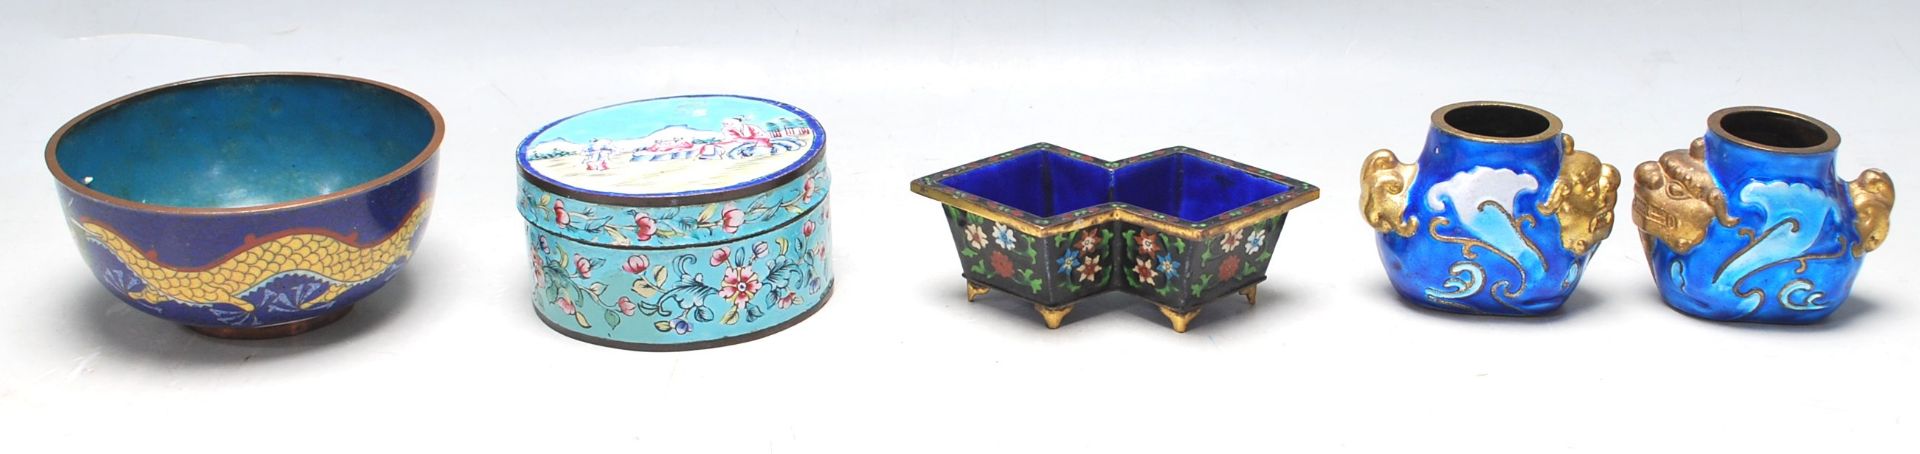 FIVE EARLY 20TH CENTURY CHINESE ENAMEL BOWLS